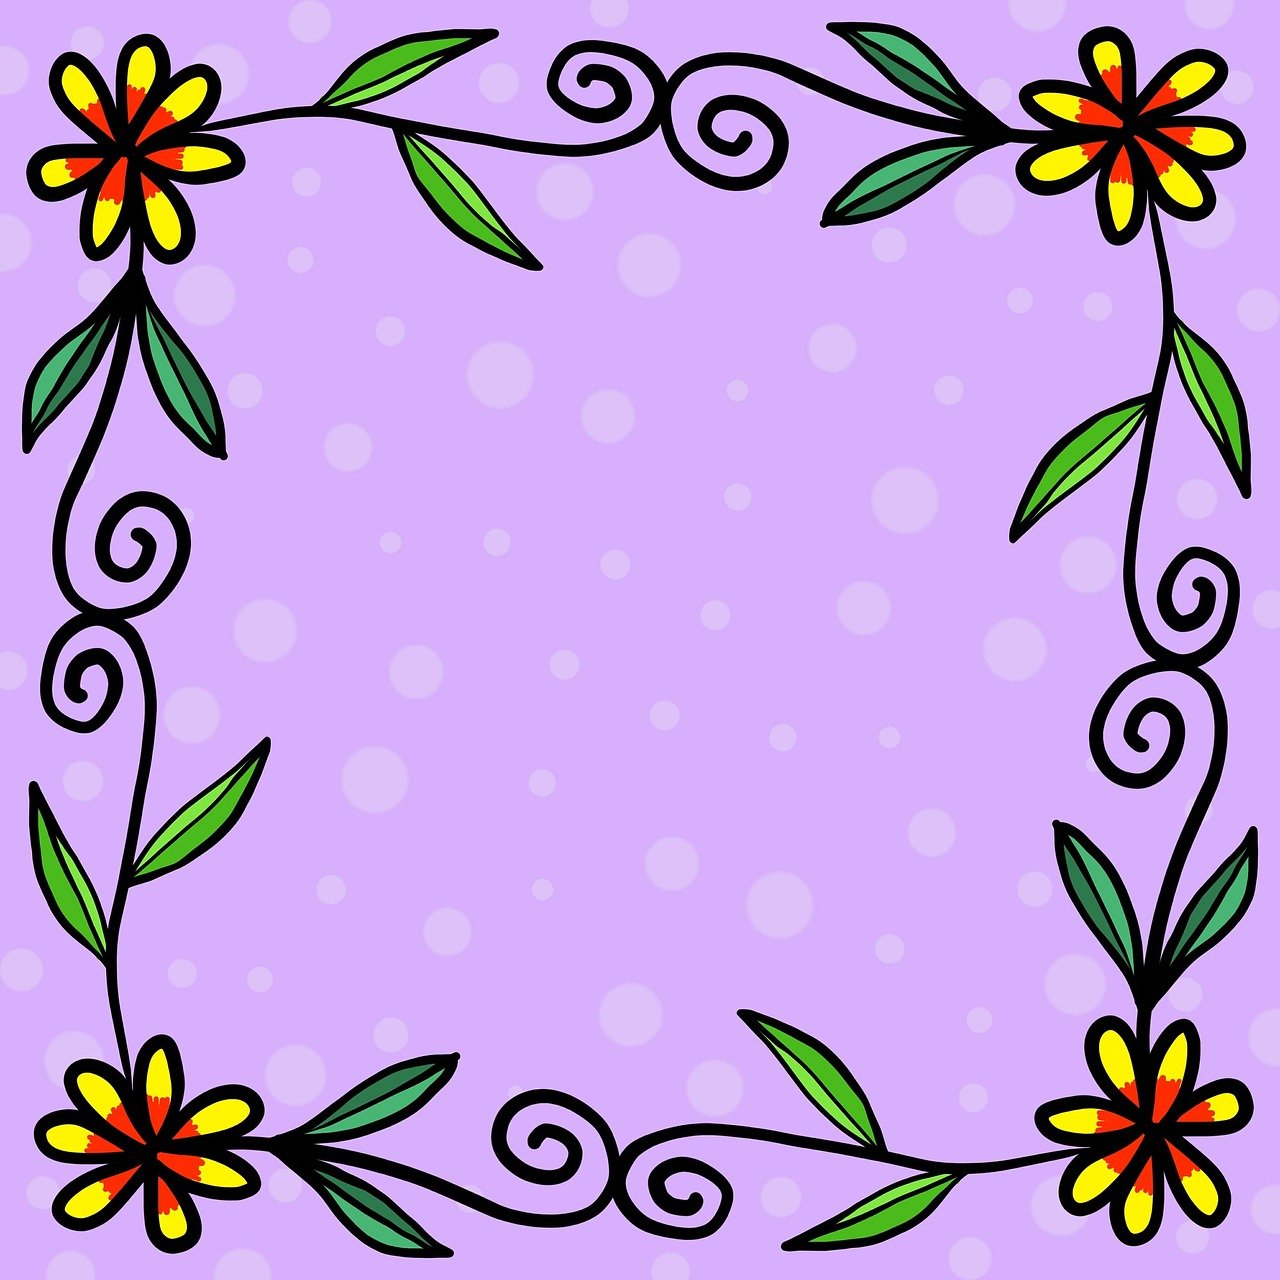 a frame with flowers and leaves on a purple background, cartoonish cute, black outlines, colored dots, computer generated